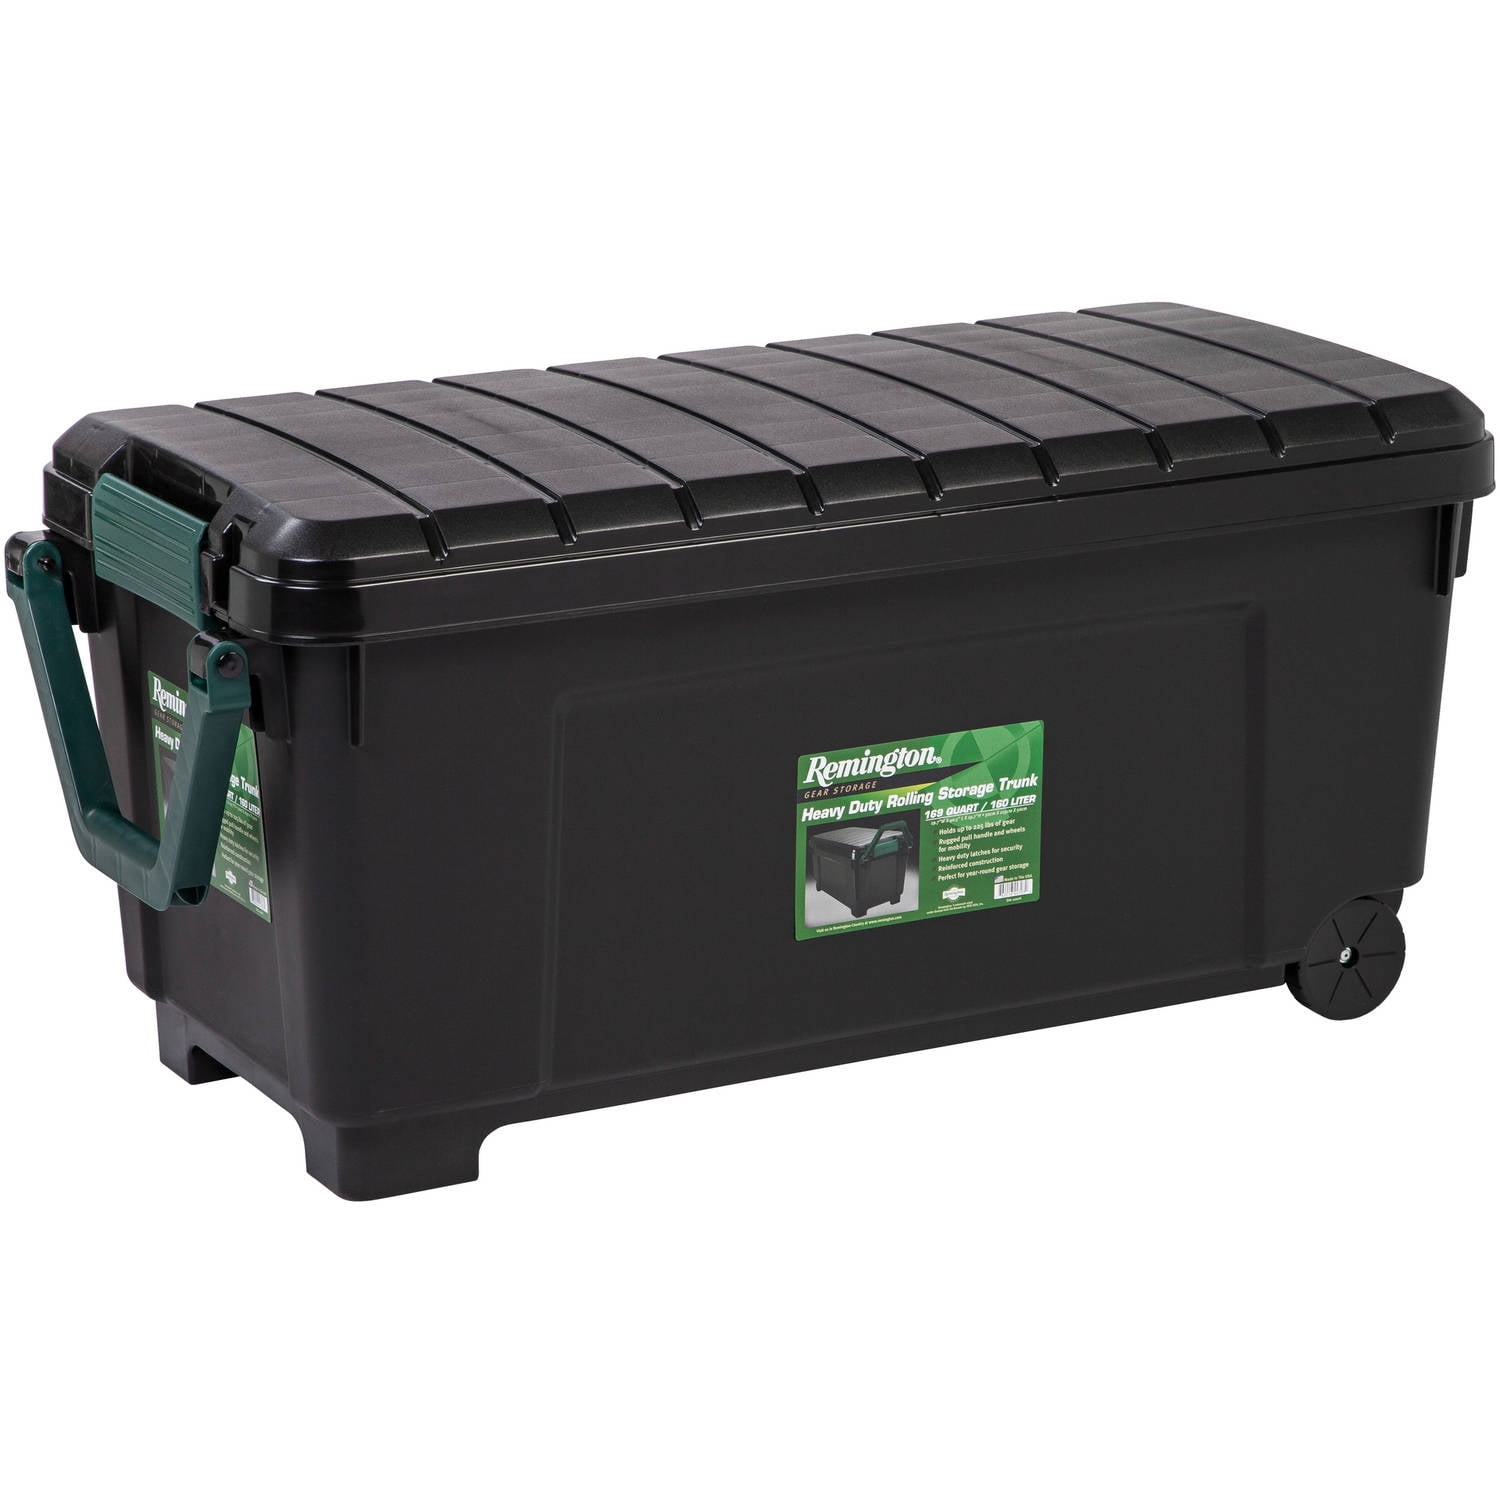 JEGS 49040: BFT Heavy-Duty Plastic Storage Tote